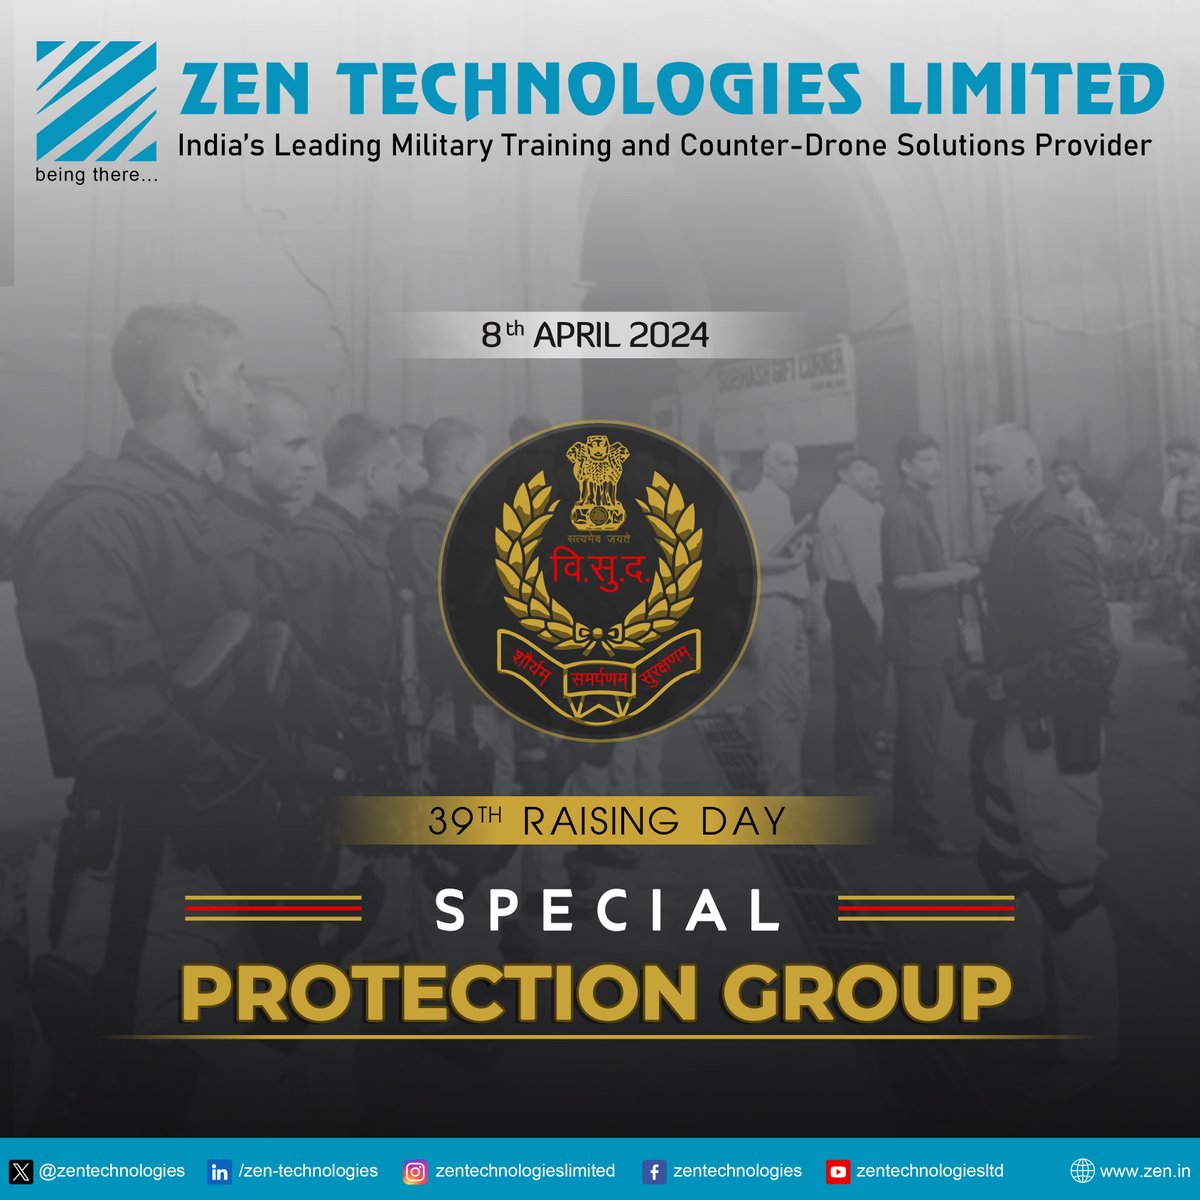 @ZenTechnologies commemorates the unwavering dedication and commitment of the #SpecialProtectionGroup on their 39th #RaisingDay. Their #vigilance ensures the safety of our Nation's leaders and their families. #SPGRaisingDay #Security #ZenTec